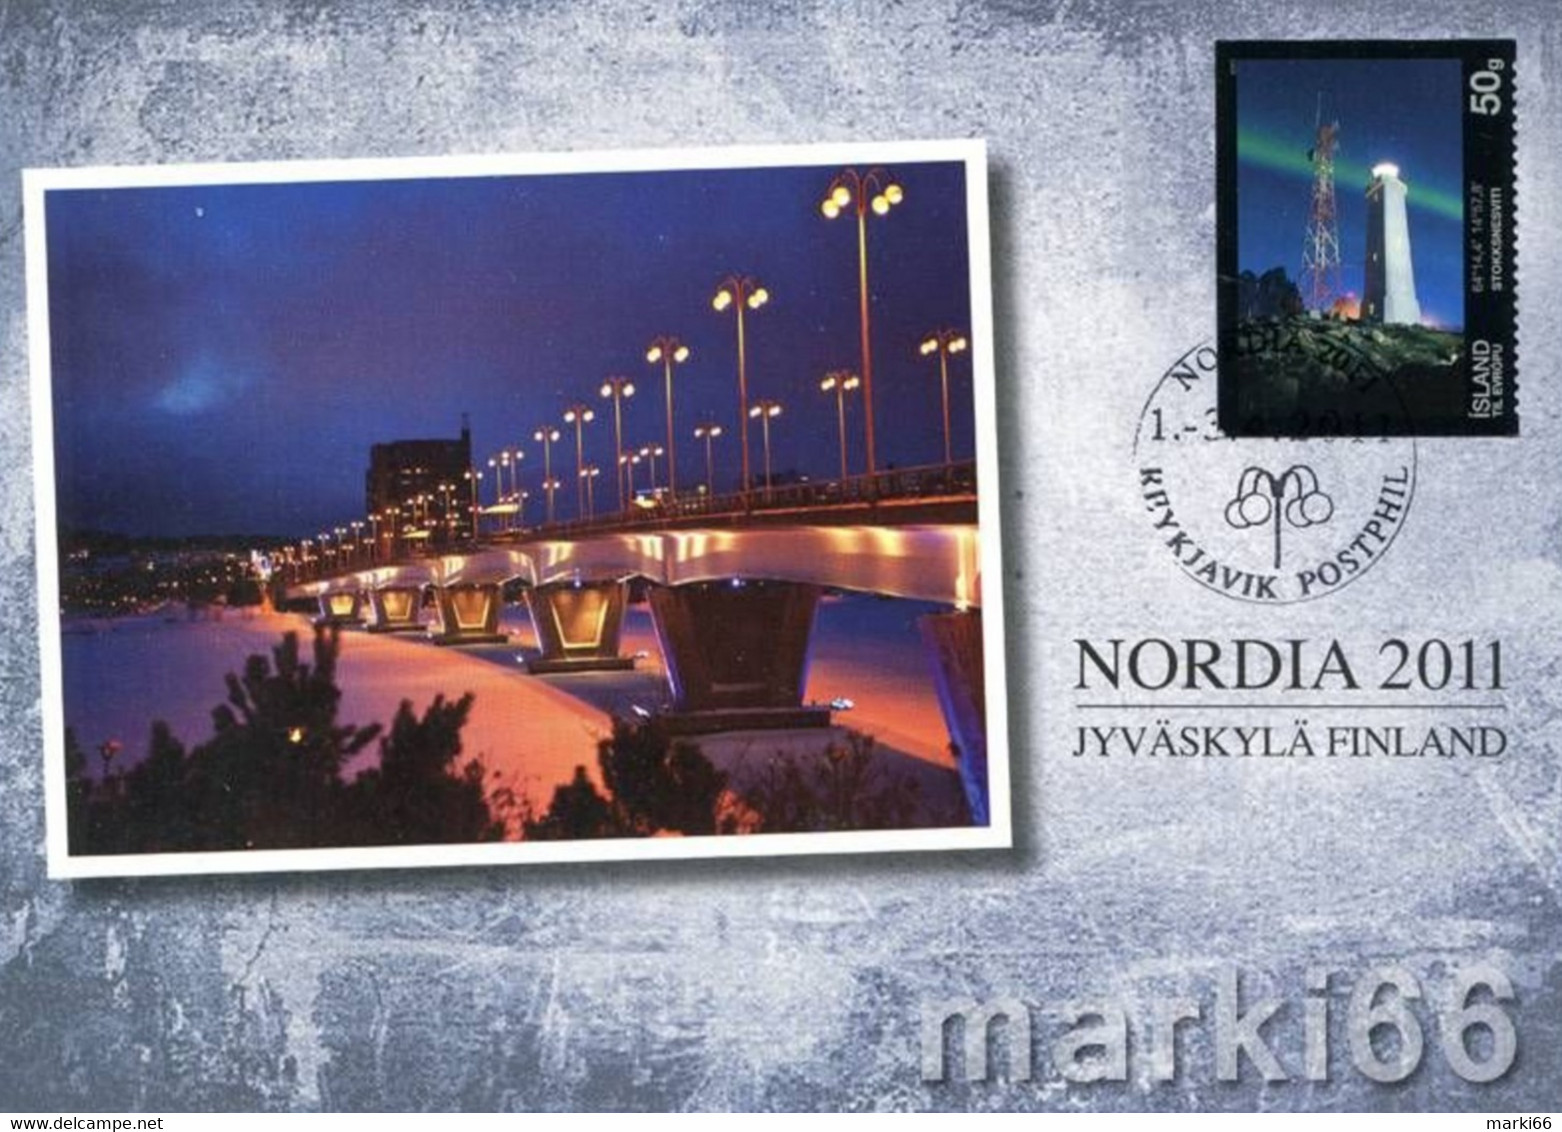 Iceland - 2011 - Exhibition Card - NORDIA 2011, Finland - Official Postcard With Stamp And Special Postmark - Maximum Cards